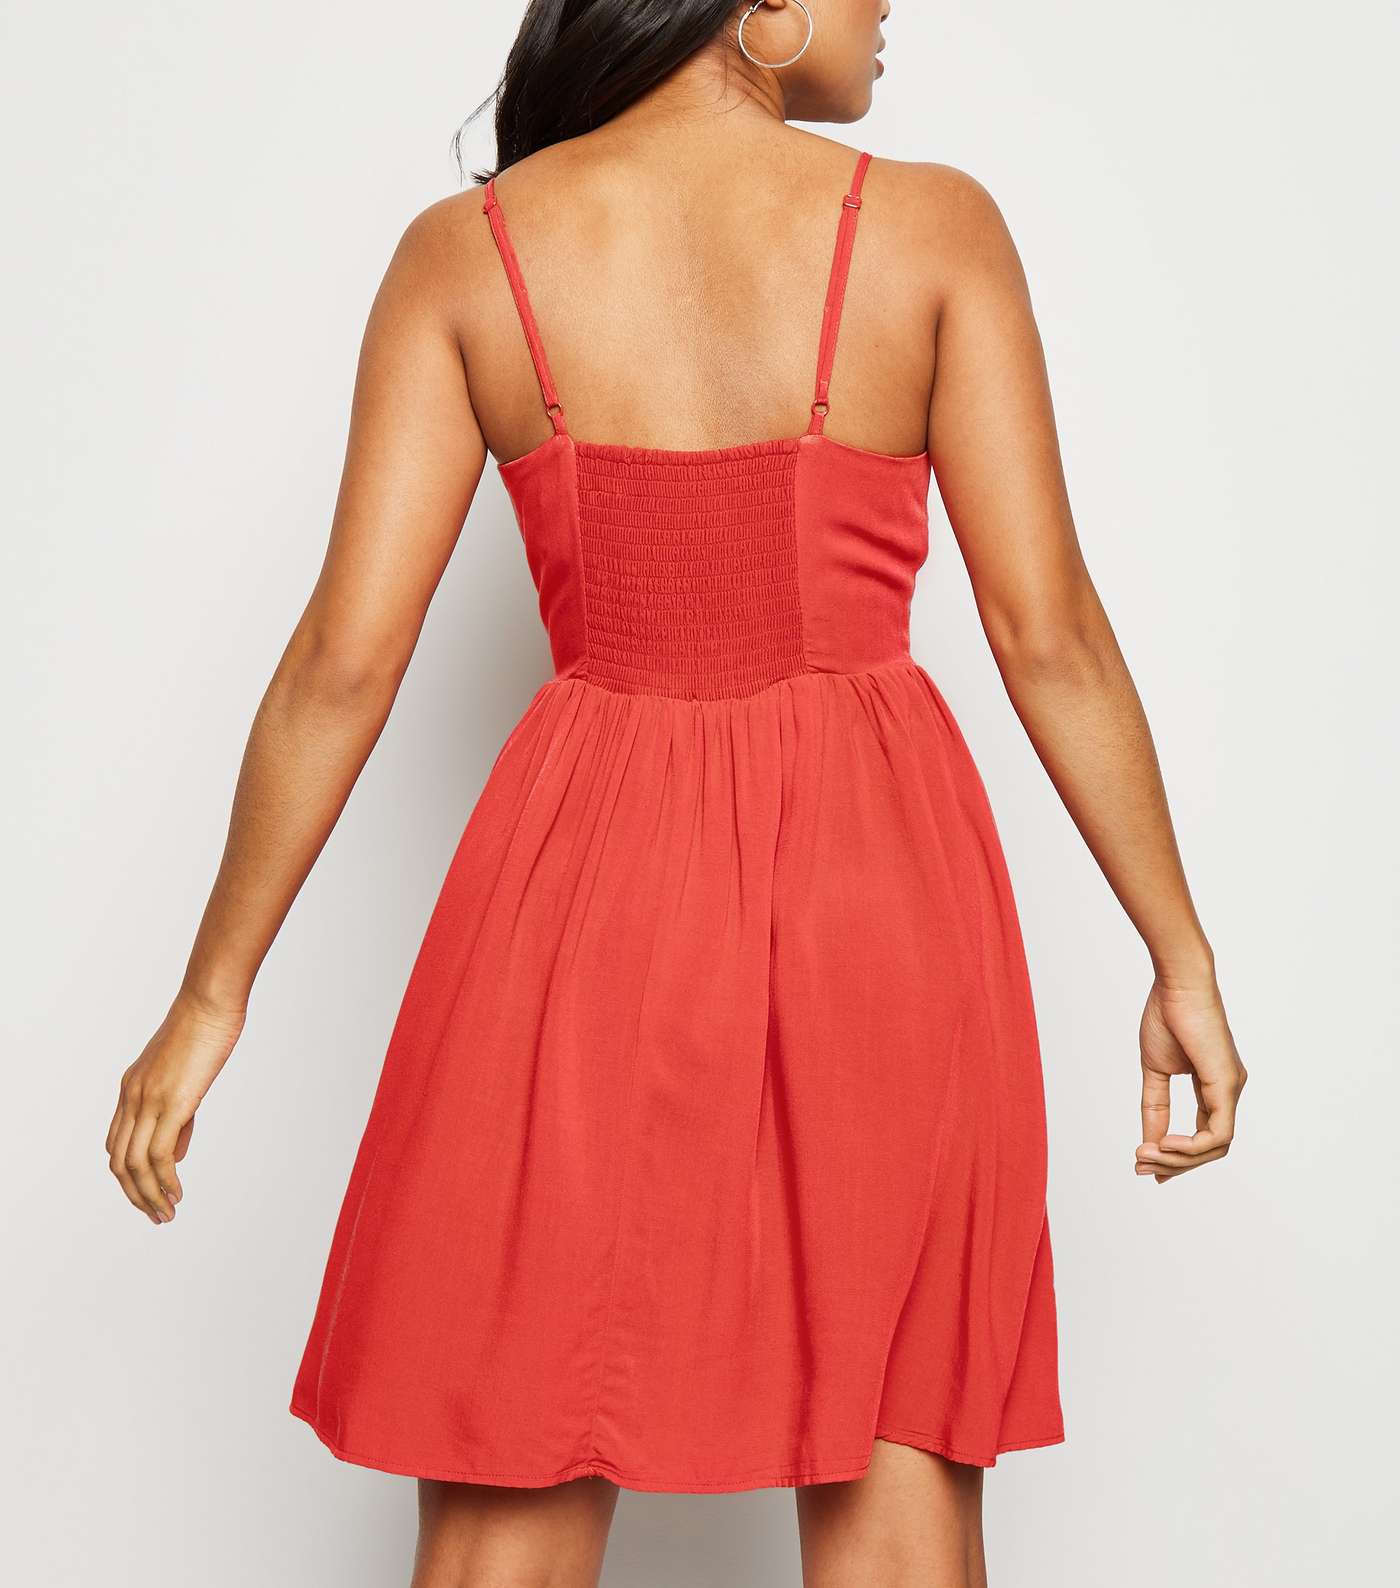 Petite Red Lace Up Skater Dress Image 3